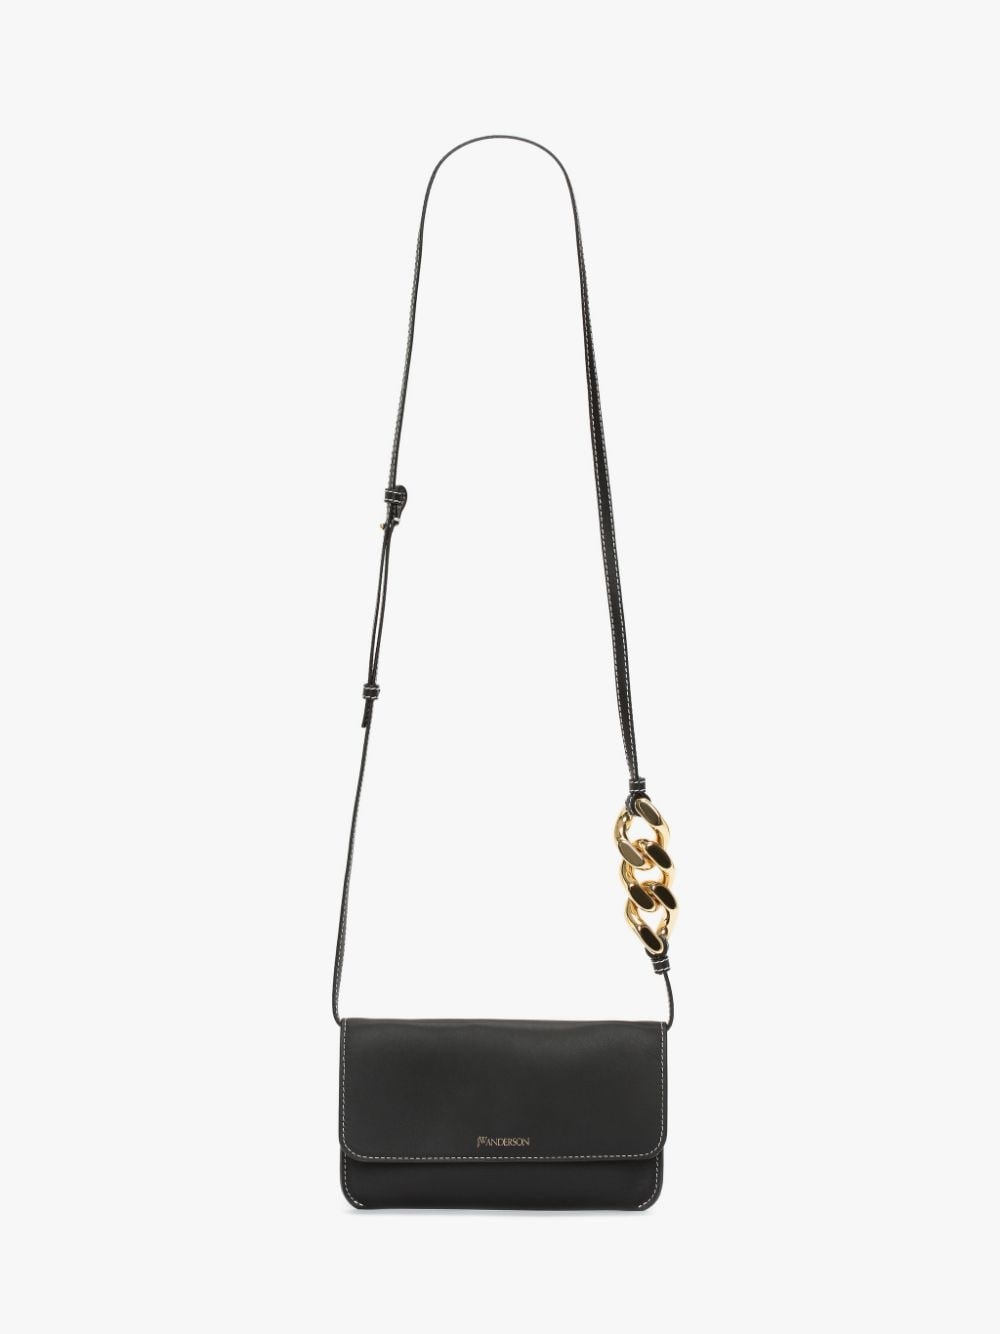 JW Anderson phone leather pouch bag - Black